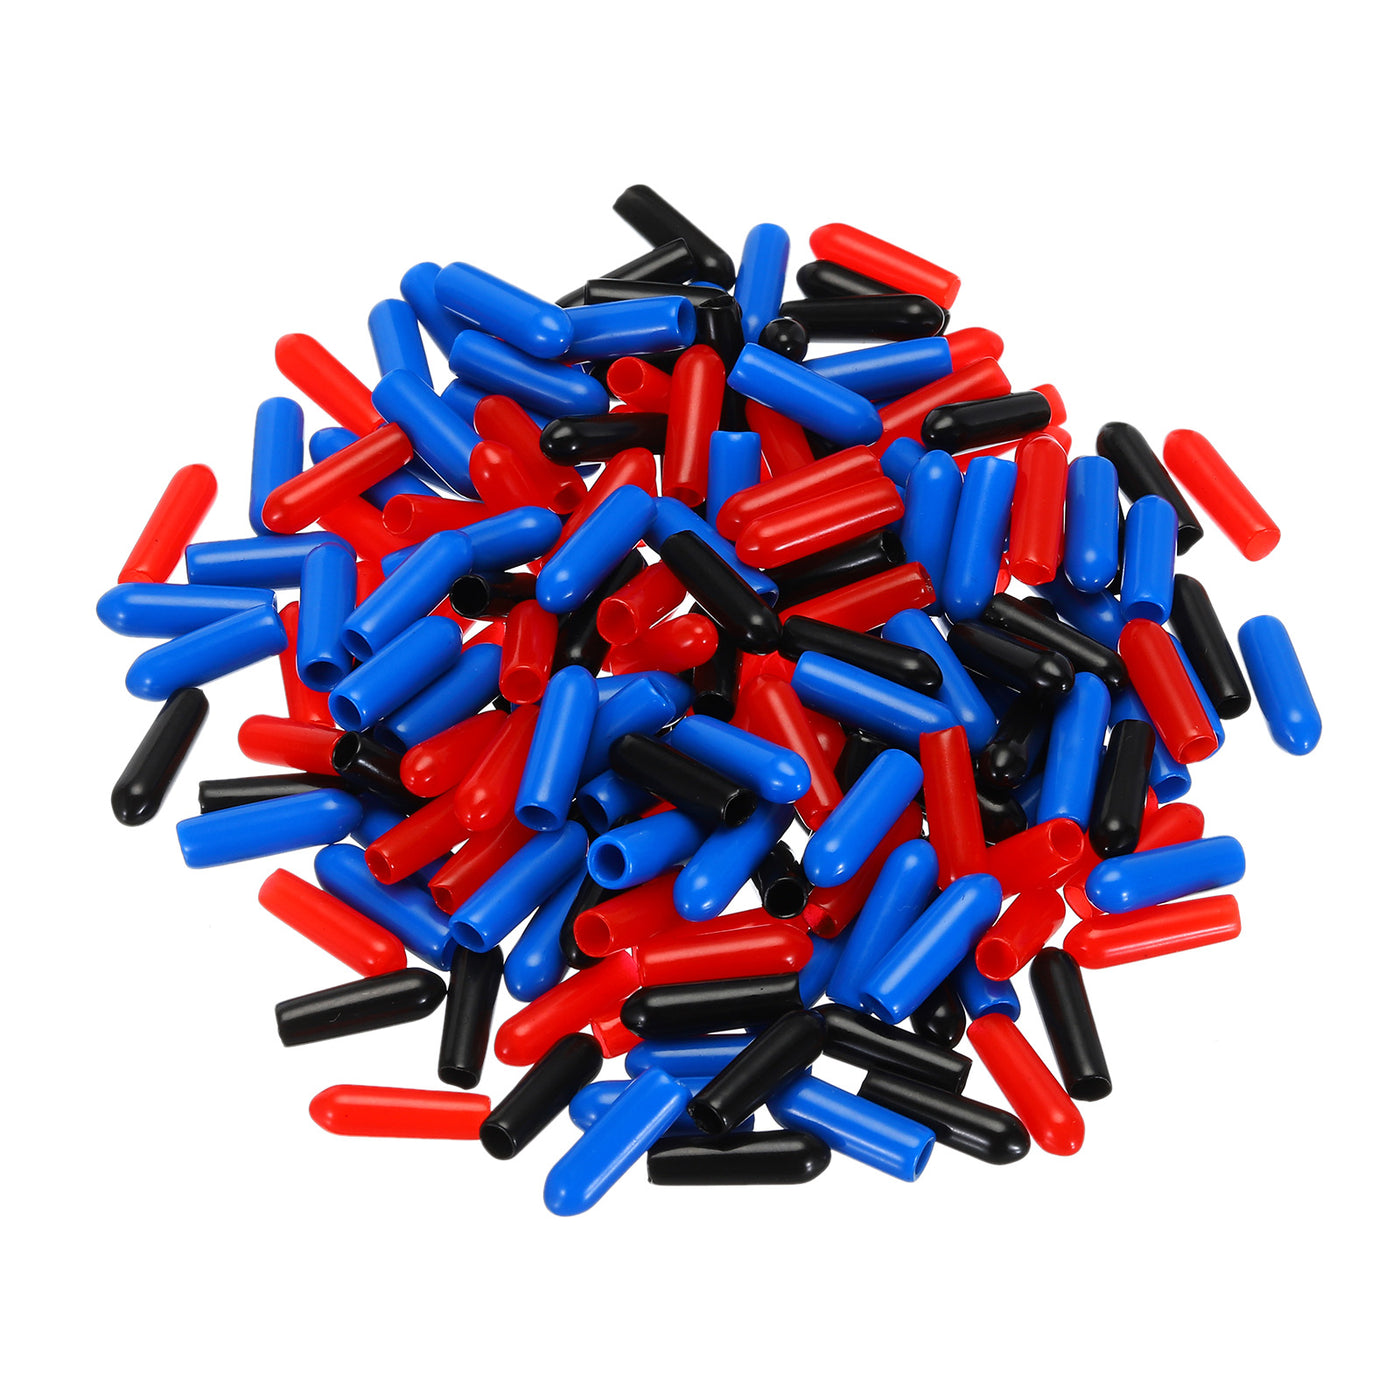 uxcell Uxcell 180pcs Rubber End Caps 3.5mm(1/8") ID Vinyl PVC Round Tube Bolt Cap Cover Screw Thread Protectors, Black Red Blue